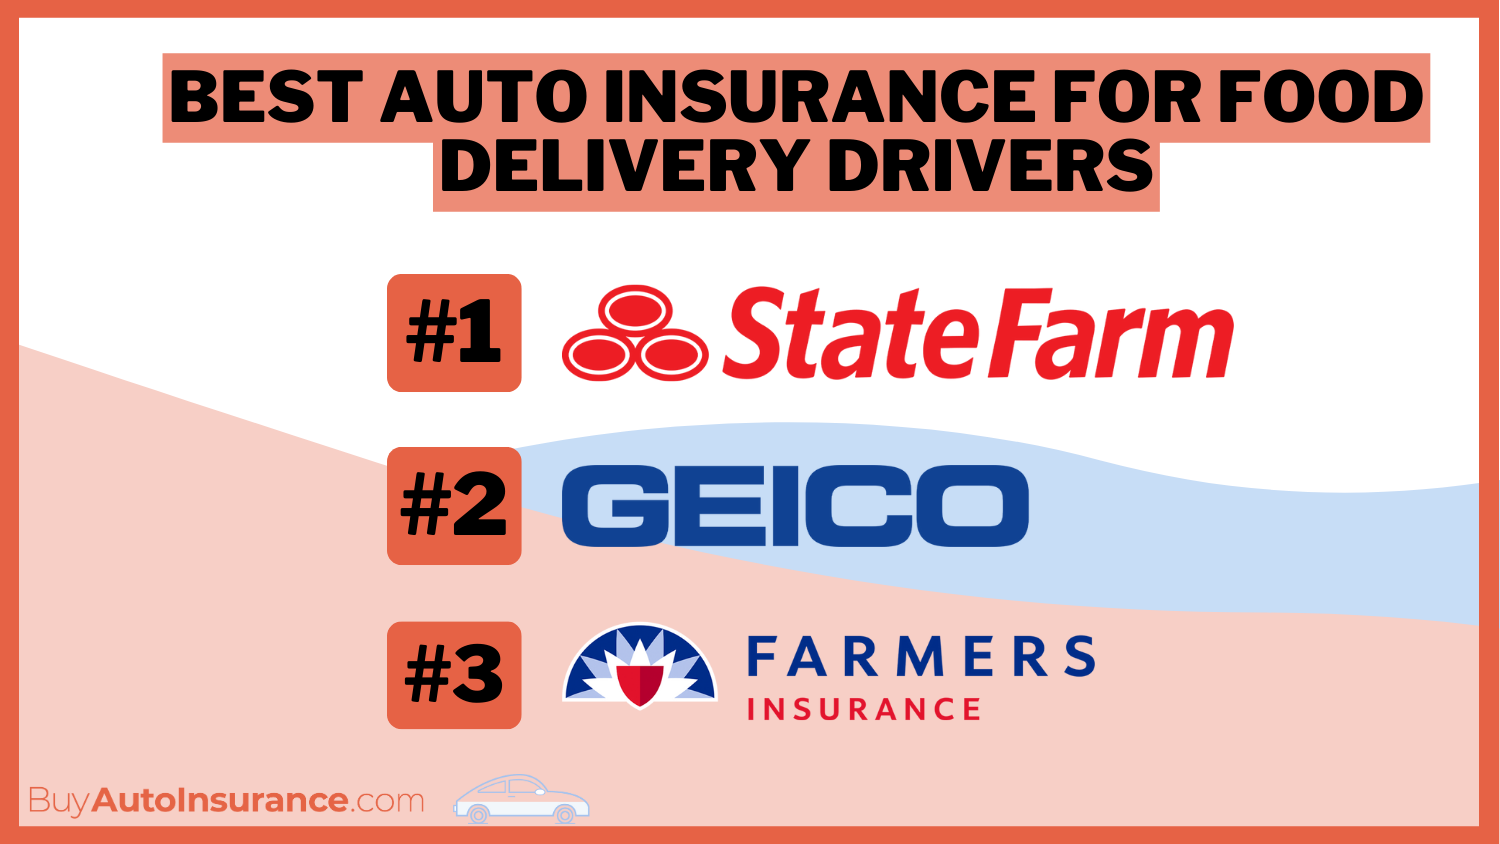 State Farm, Geico, and Farmers best auto insurance for food delivery drivers 